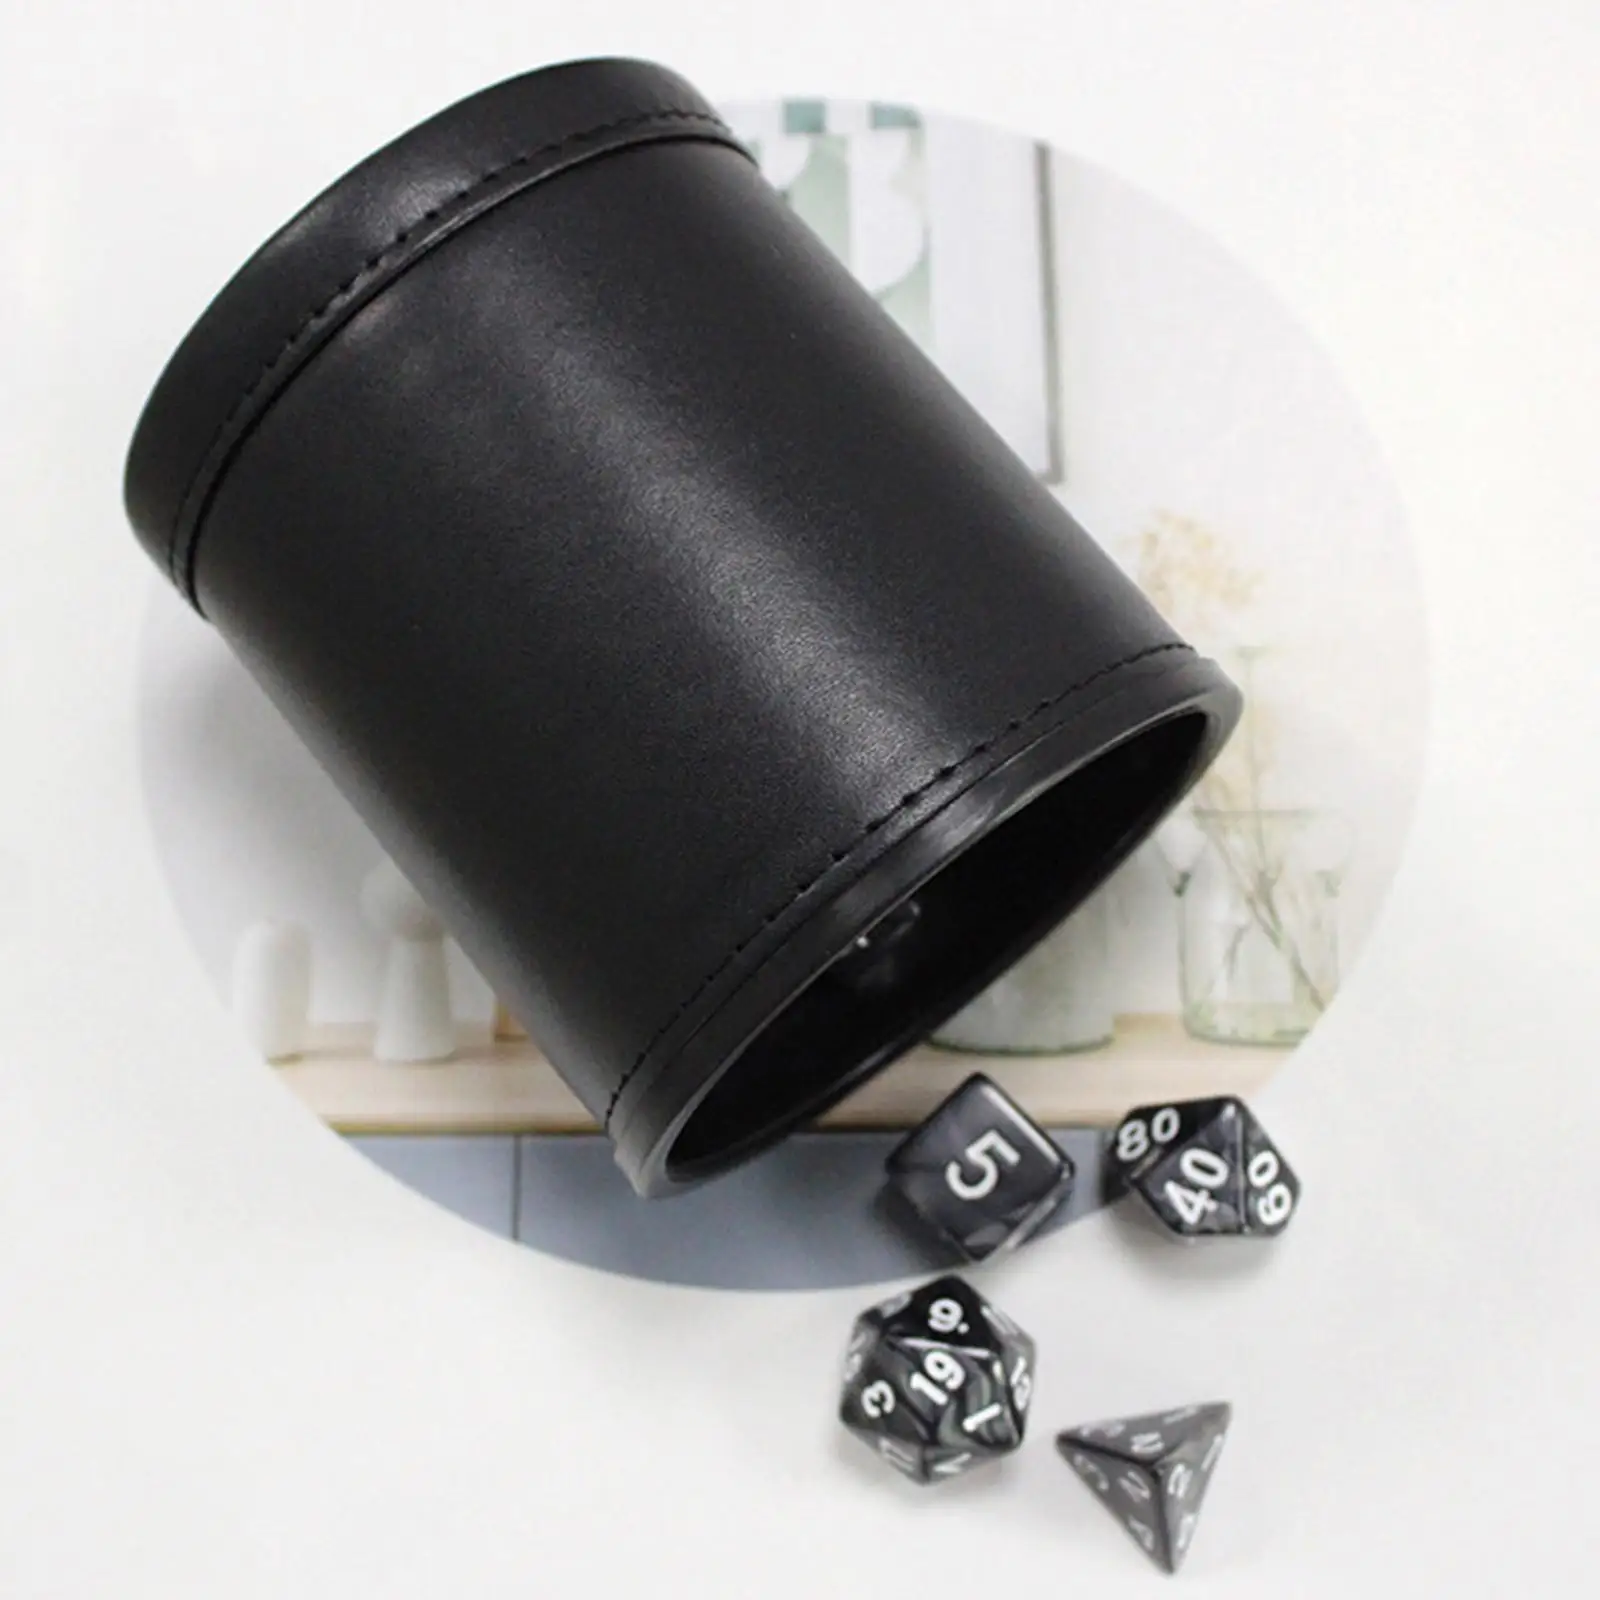 Manual Dice Cup Entertainment Dice Game Accessories Dice Shaker for Club Party Family Home